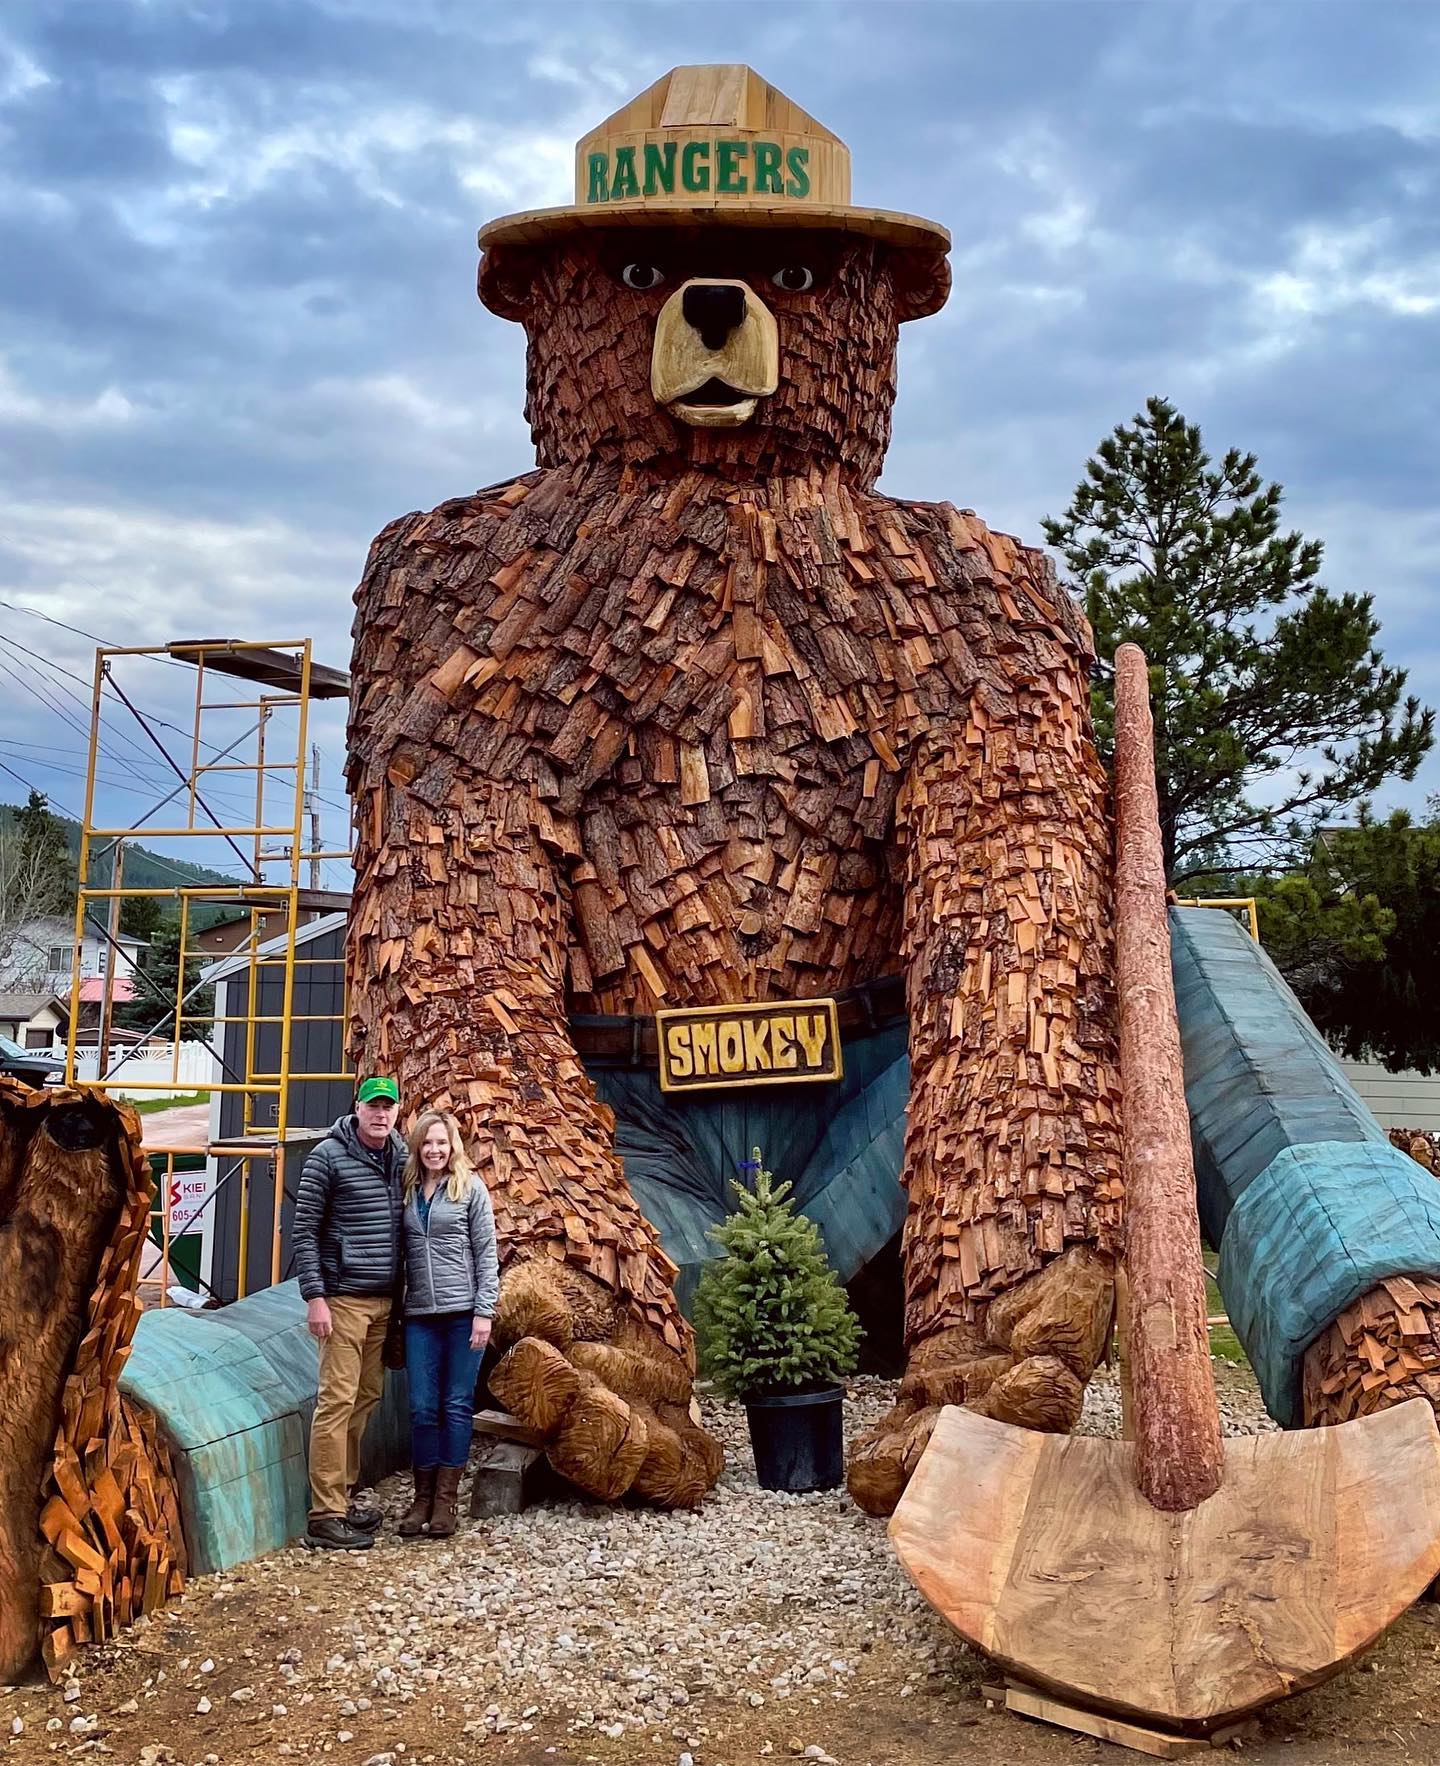 Getting our picture taken next to the largest Smokey Bear statue in the world is proof that dreams do come true. 

On today’s episode 82 of the Dear Bob and Sue Podcast we’re talking about the beloved mascot of the US Forest Service. Tune in to find out how and why his campaign to prevent forest fires started more than 70 years ago, how Smokey went from an animated character to a living, breathing bear, and where you can make a pilgrimage to Smokey’s birthplace: the Smokey Museum and Historical Park. 

Everything you could ever want to know about Smokey, and much, much more.